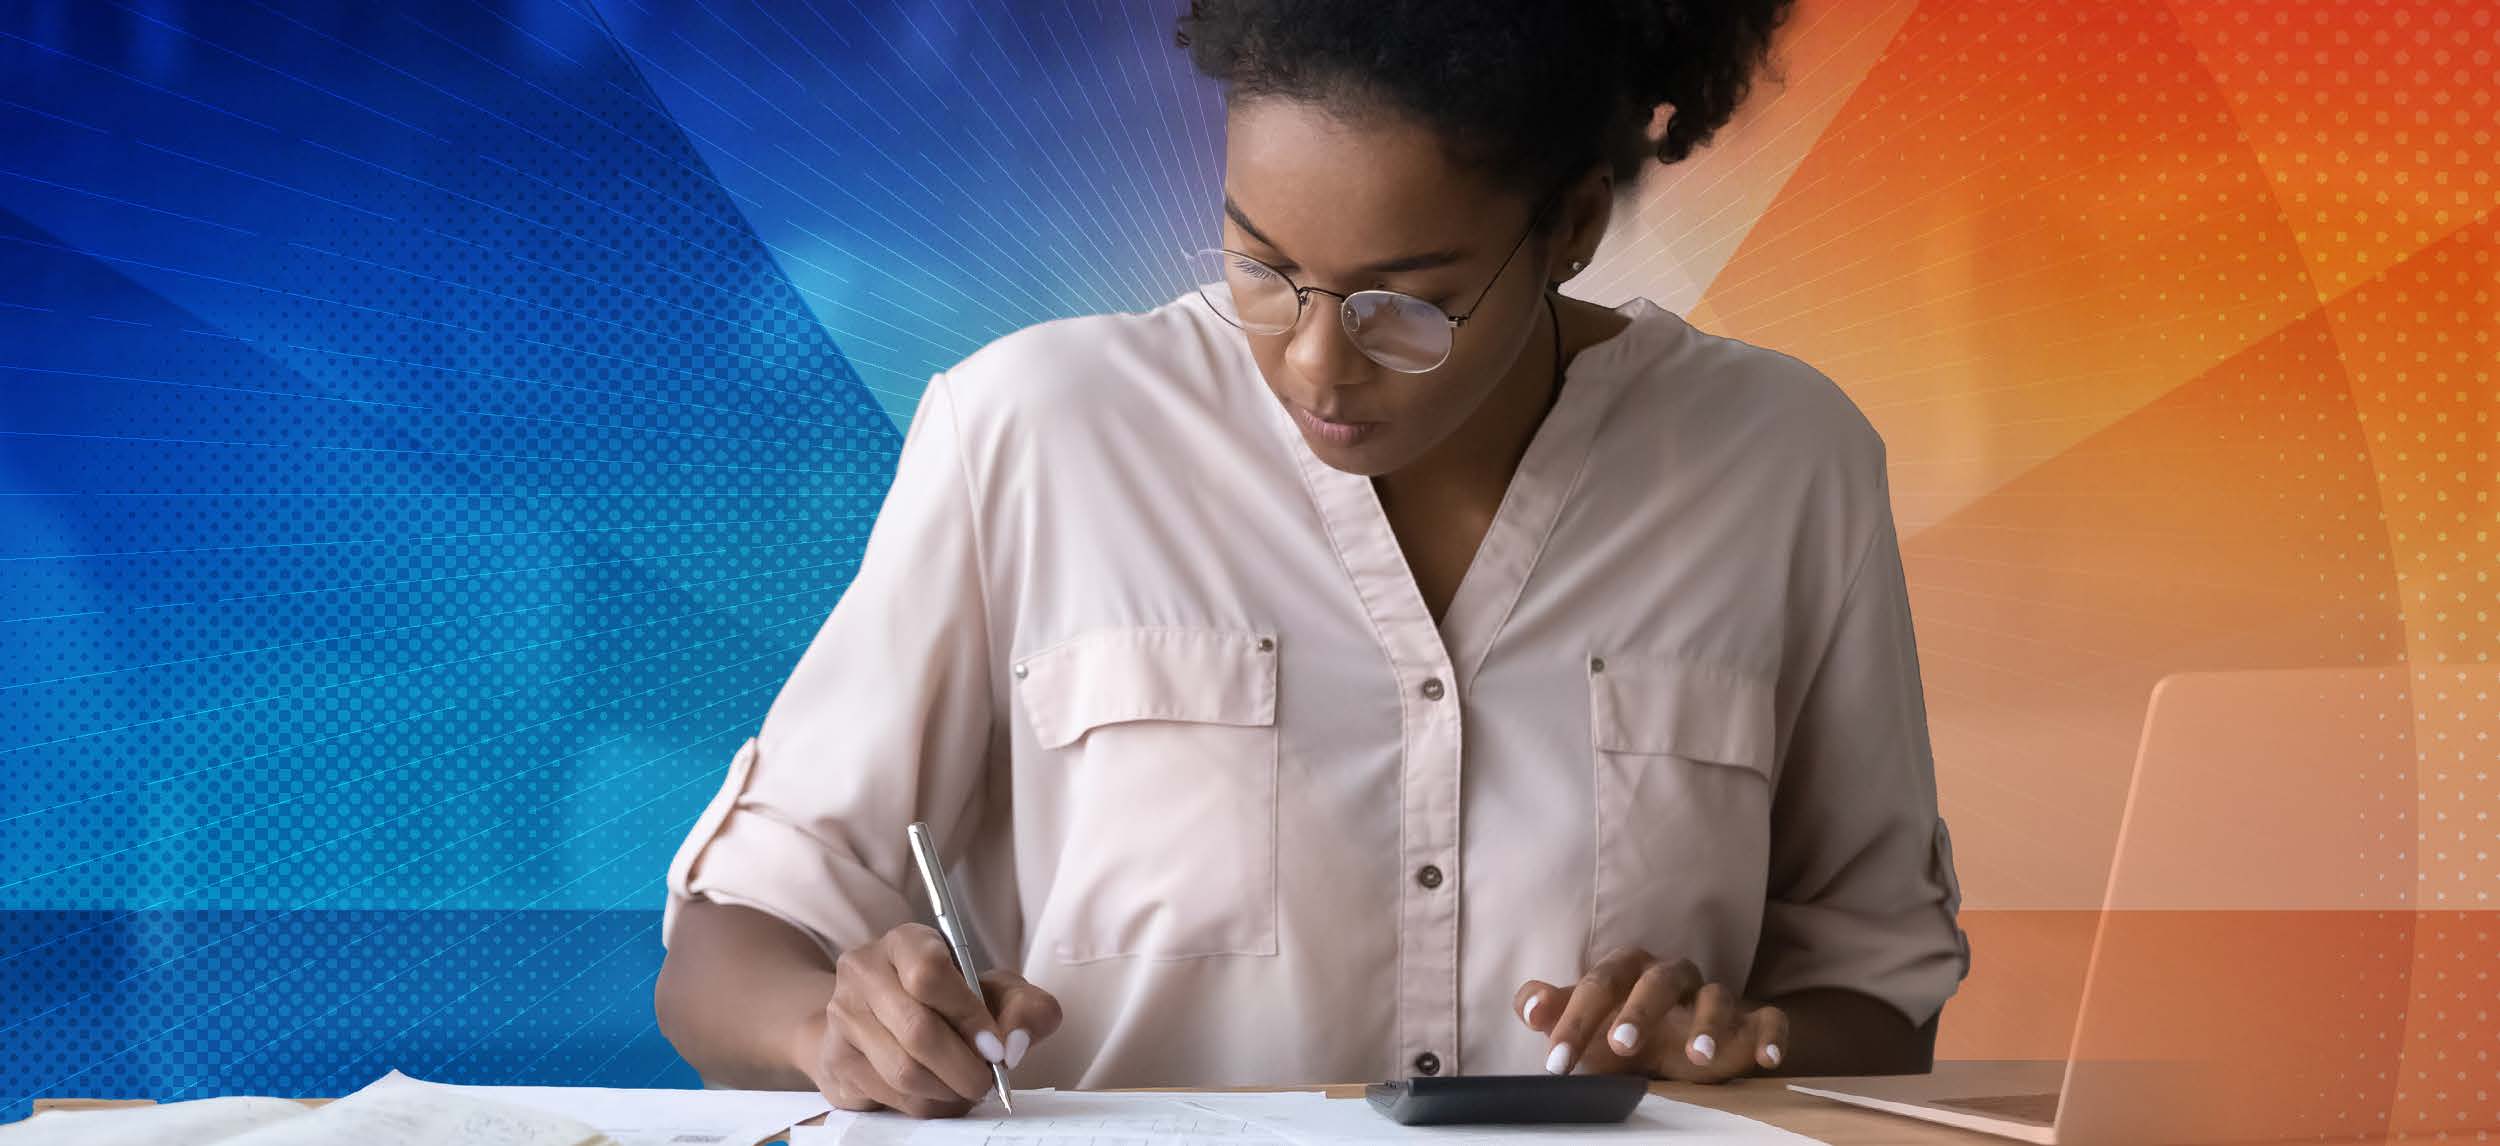 Woman working on document at desk with bright blue and orange gradient behind her